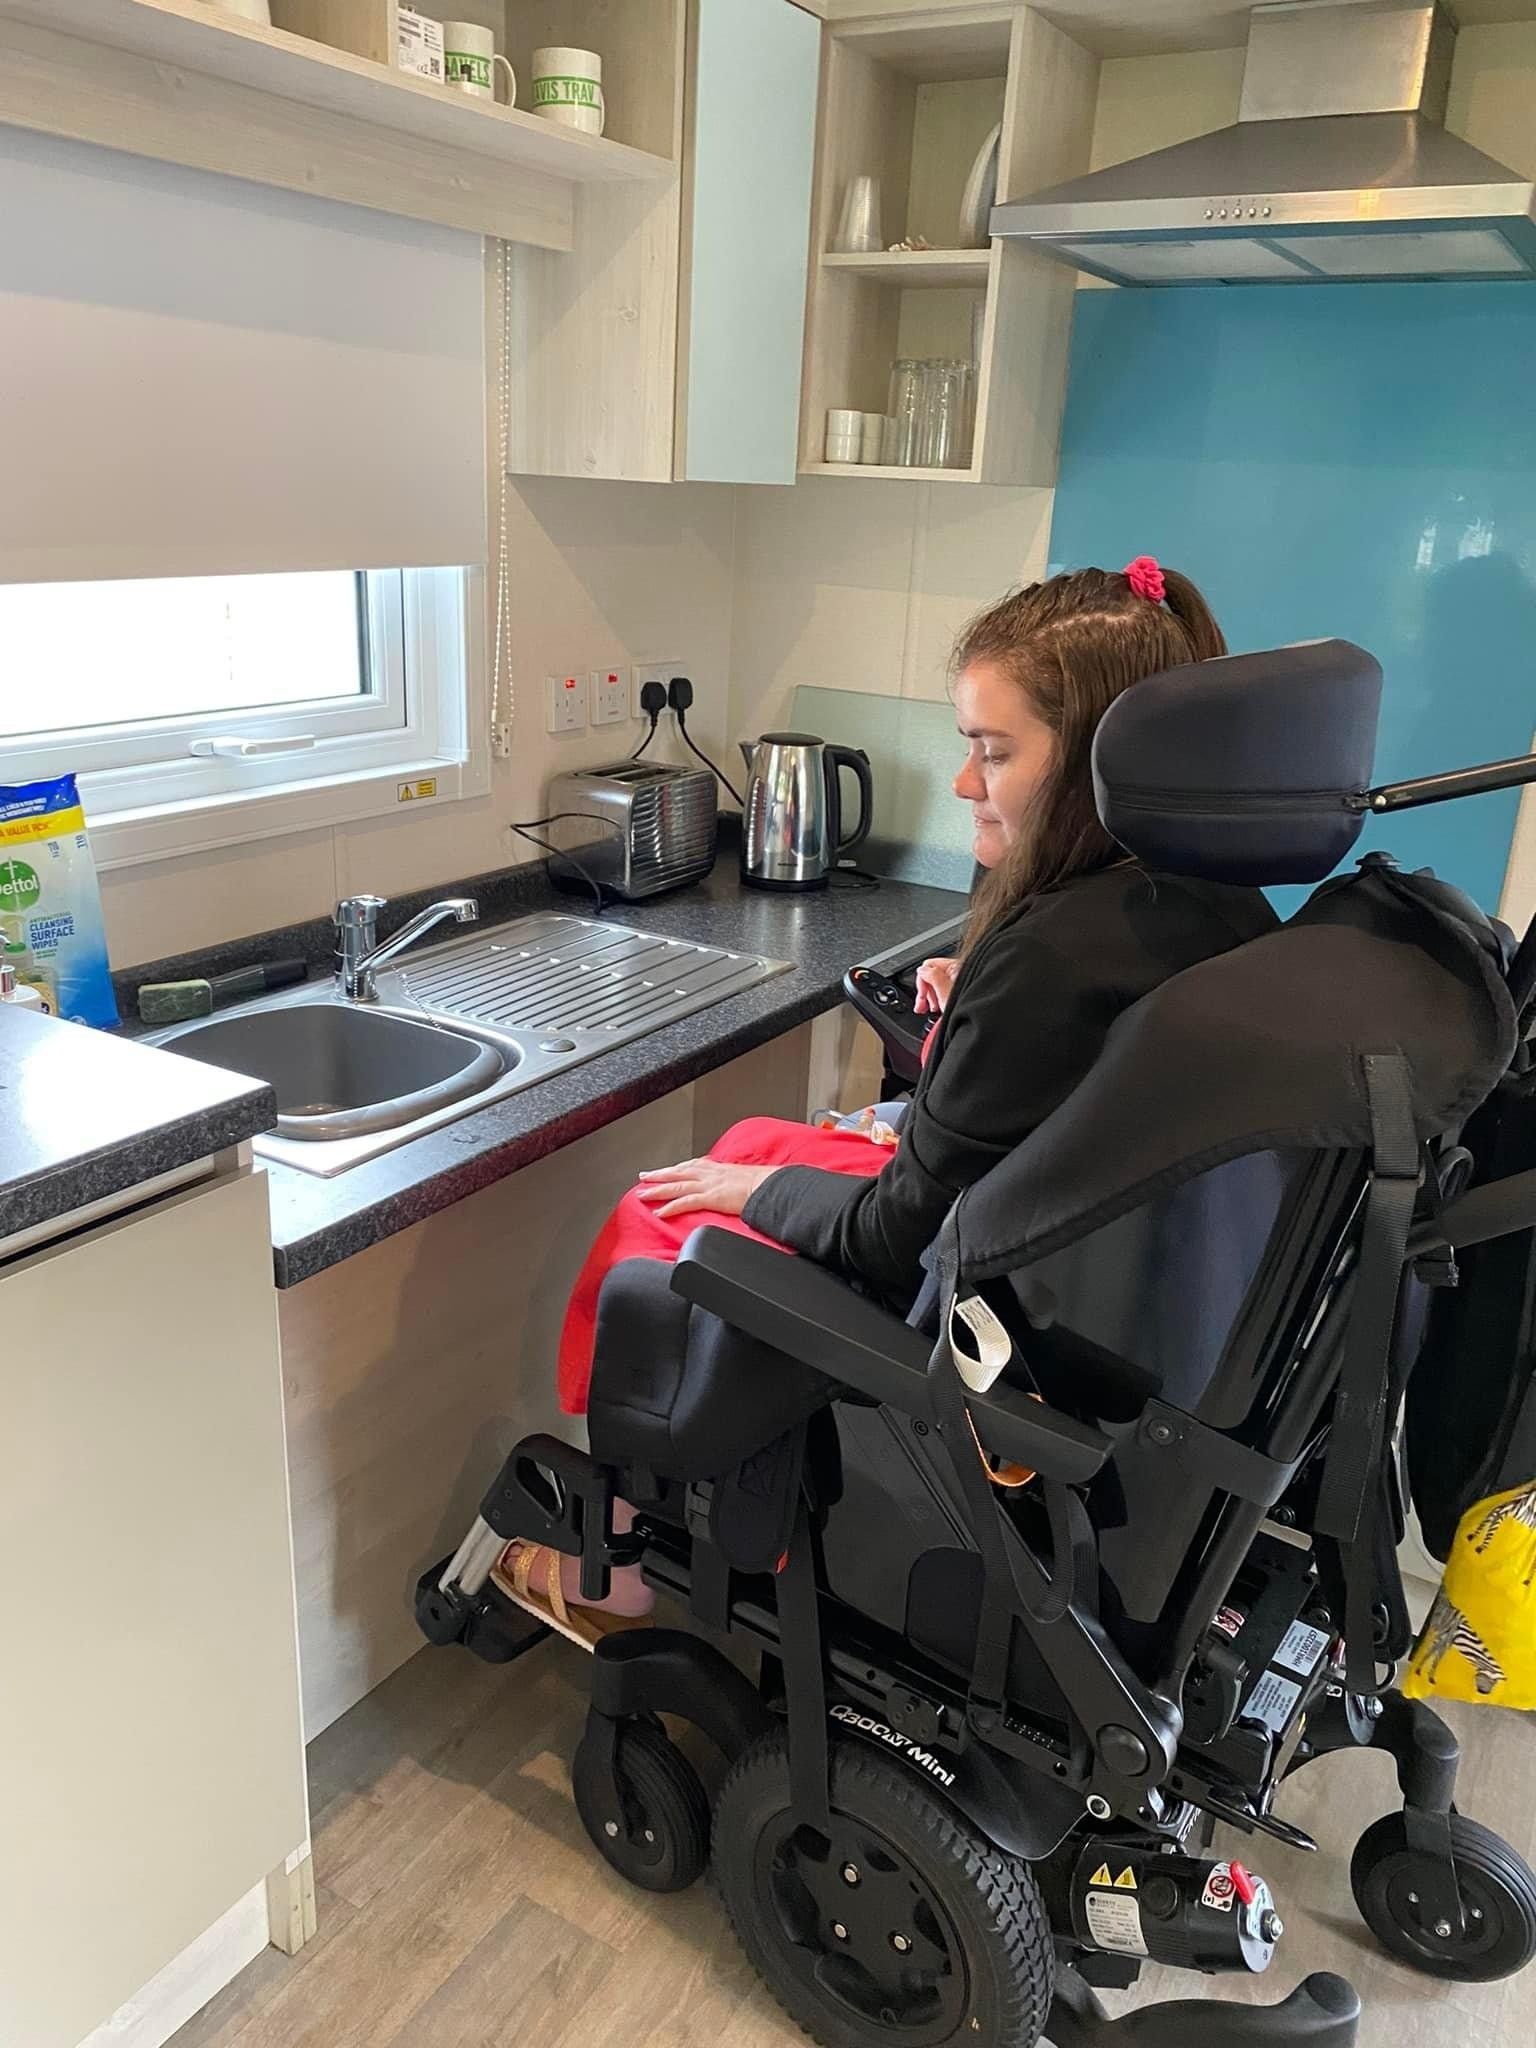 an image of a young lady in her wheelchair showing herself positioned near the kitchen sink and how easy it is to access